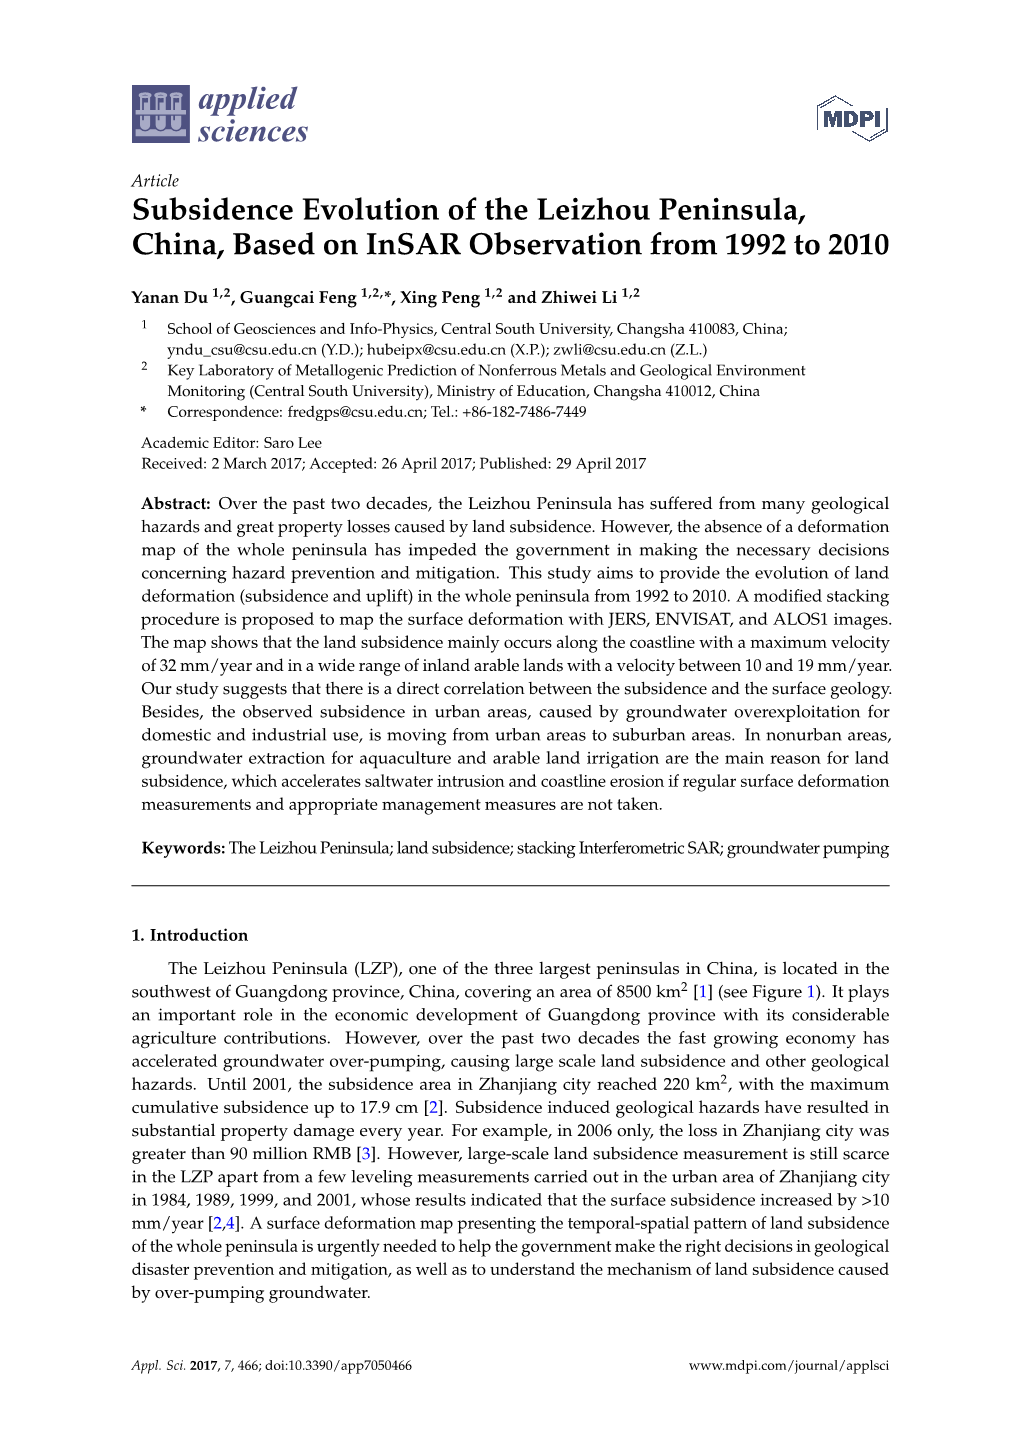 Subsidence Evolution of the Leizhou Peninsula, China, Based on Insar Observation from 1992 to 2010